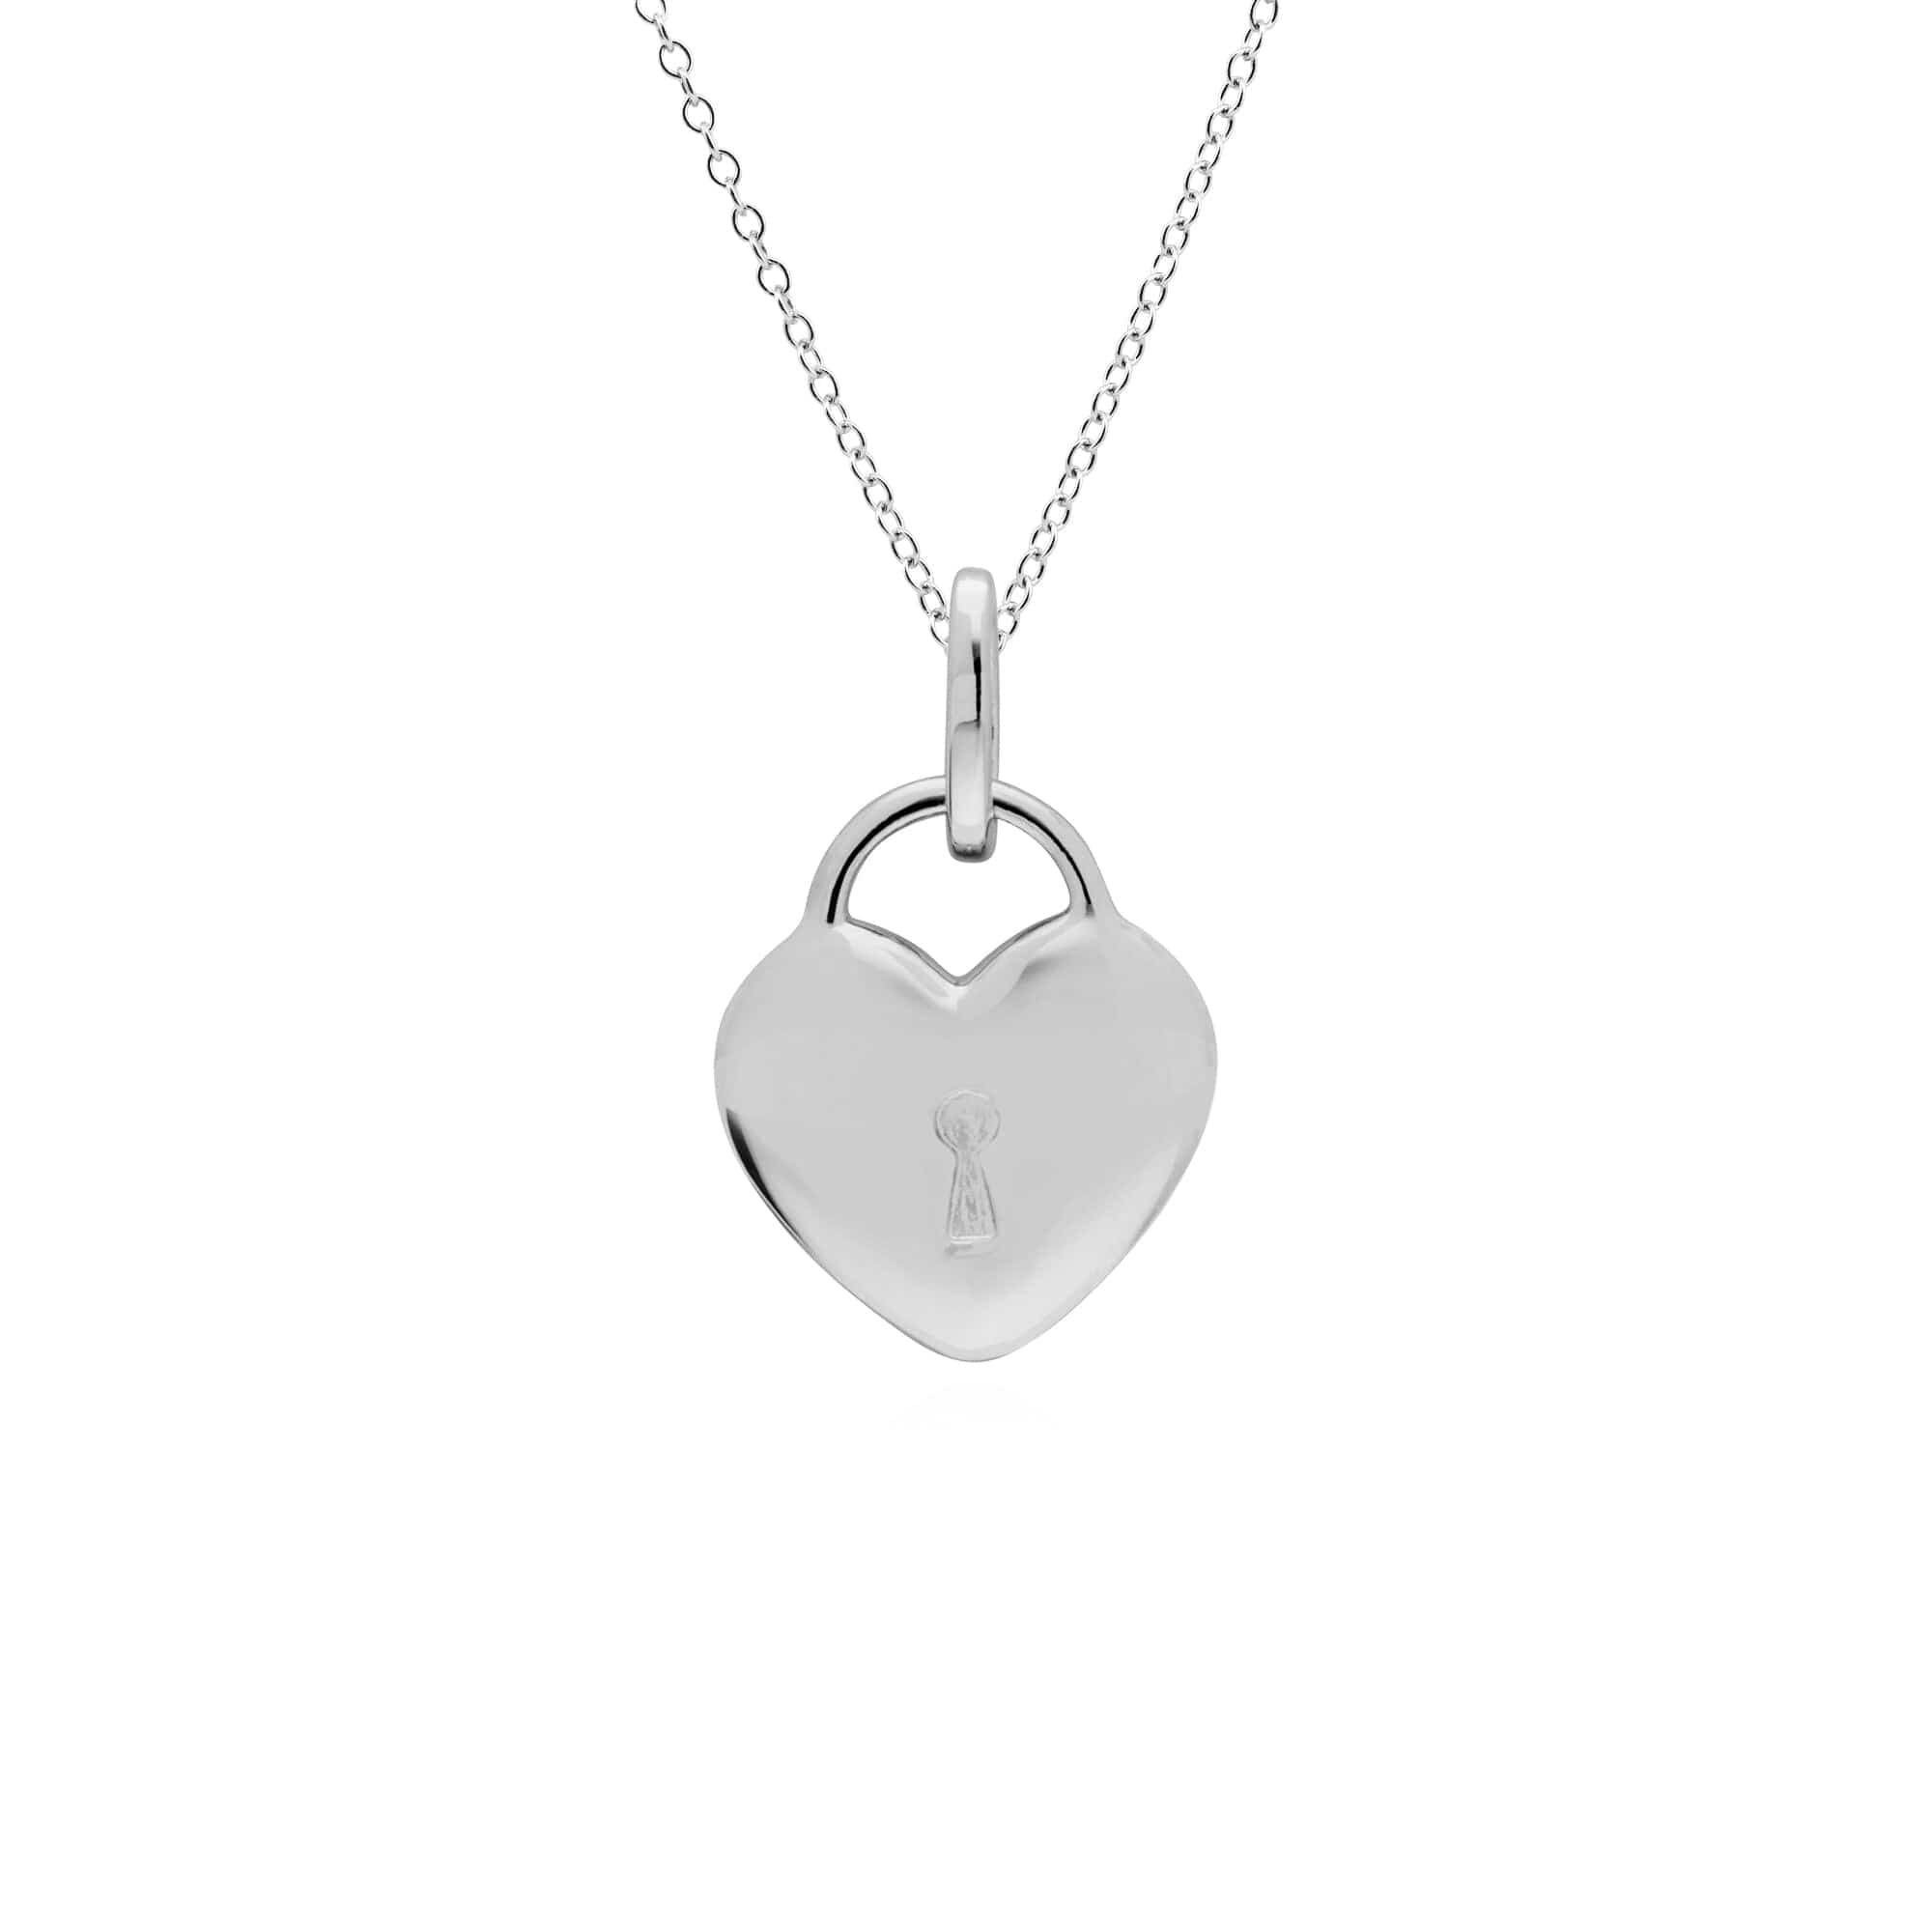 270P028402925-270P027001925 Classic Heart Lock Pendant & Opal Charm in 925 Sterling Silver 3